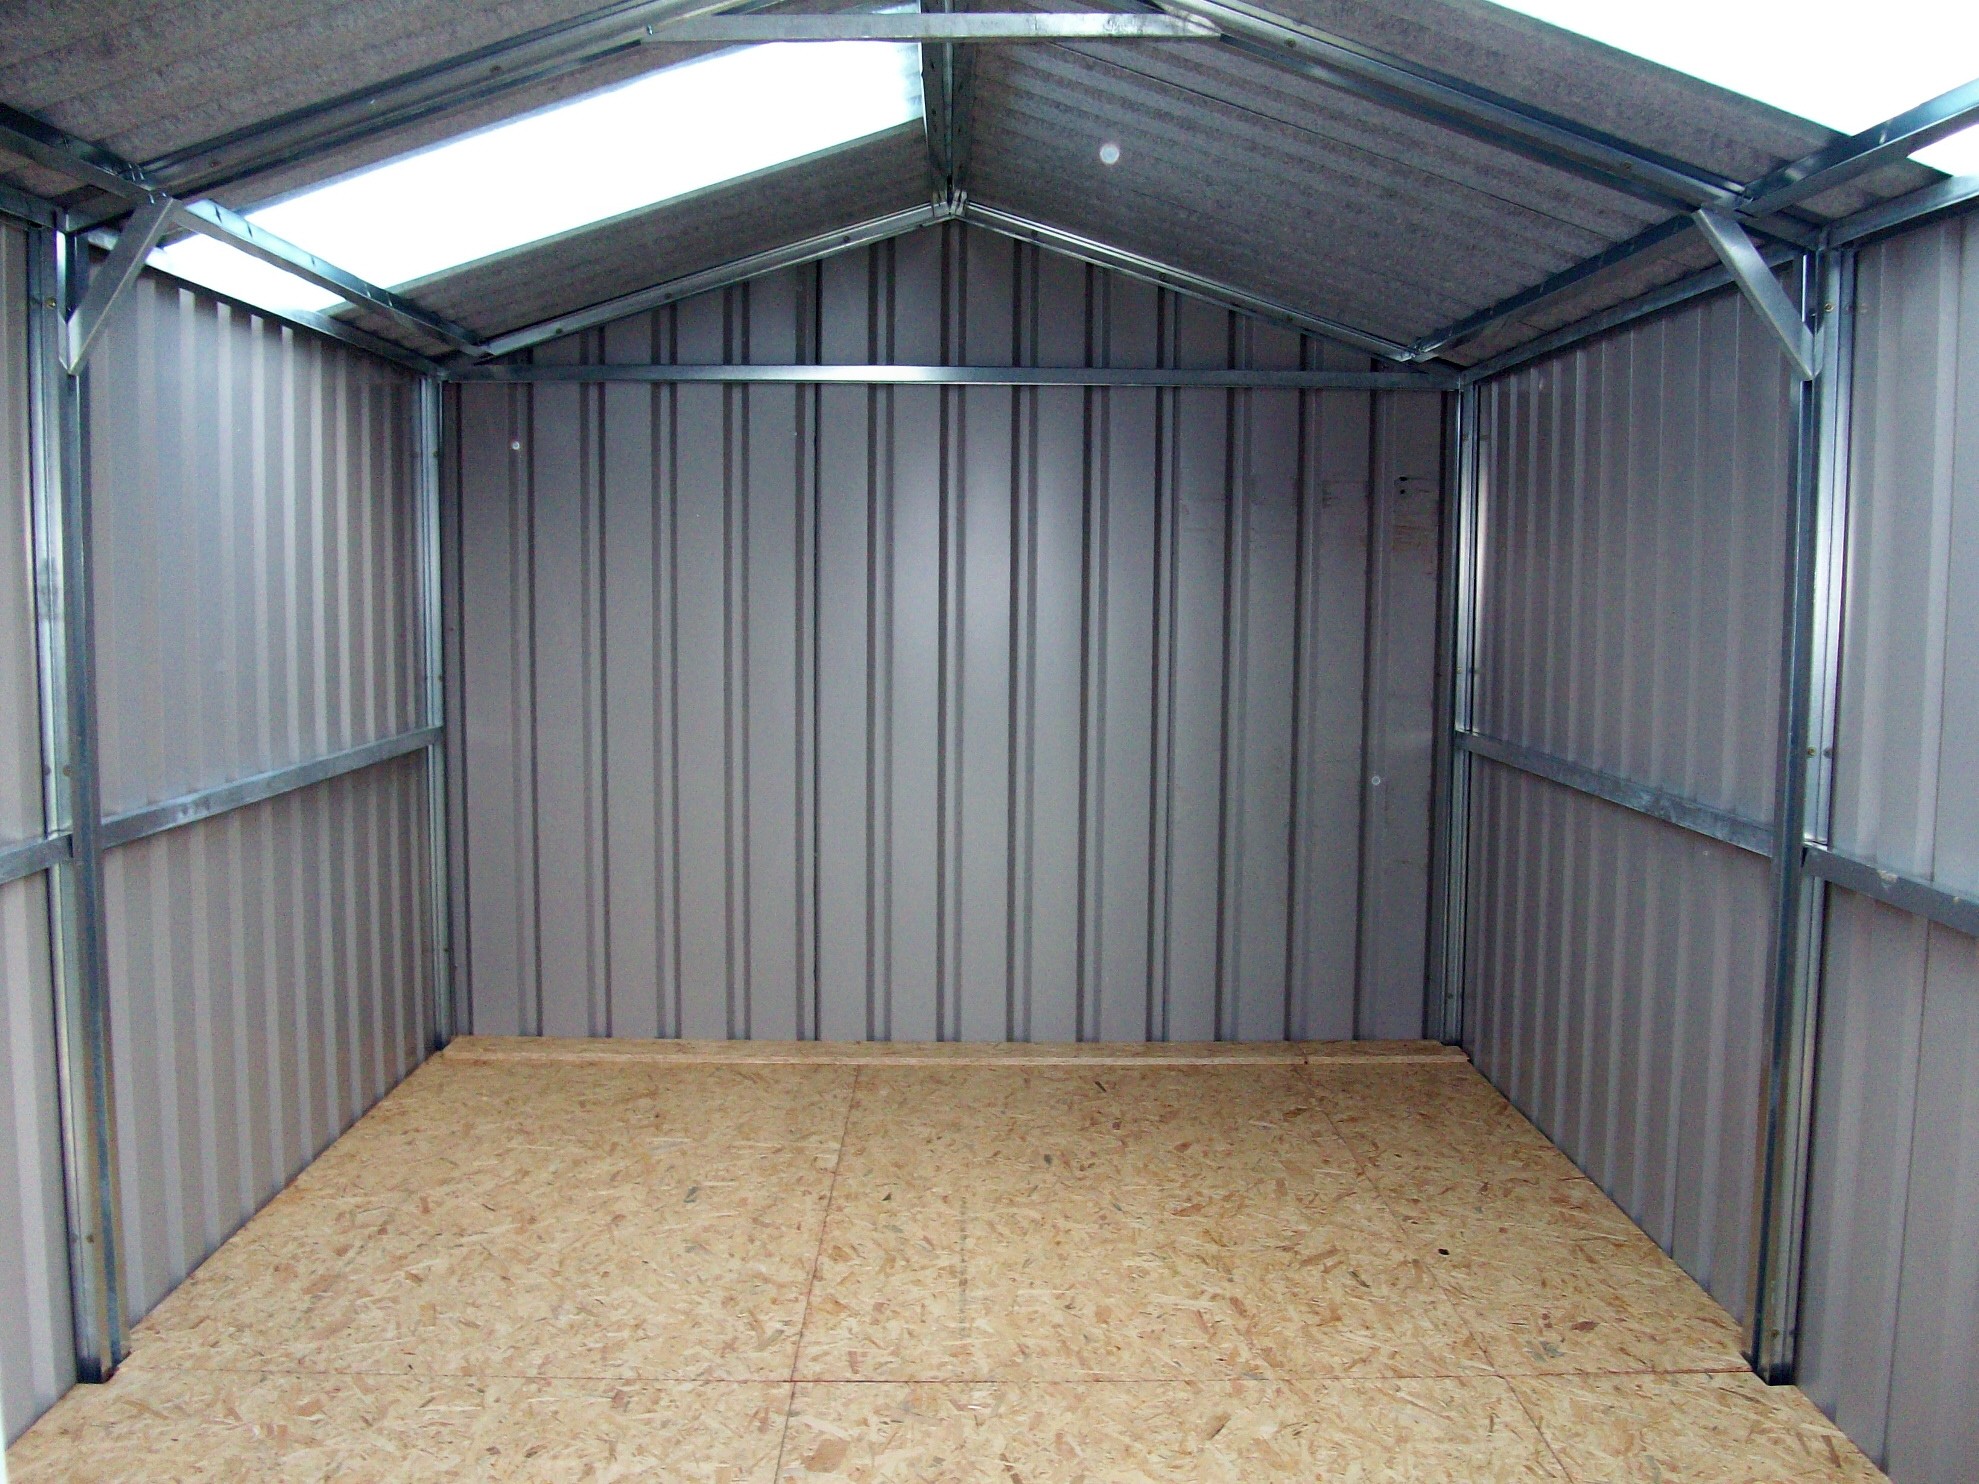 See the How to build small metal shed ~ Goehs